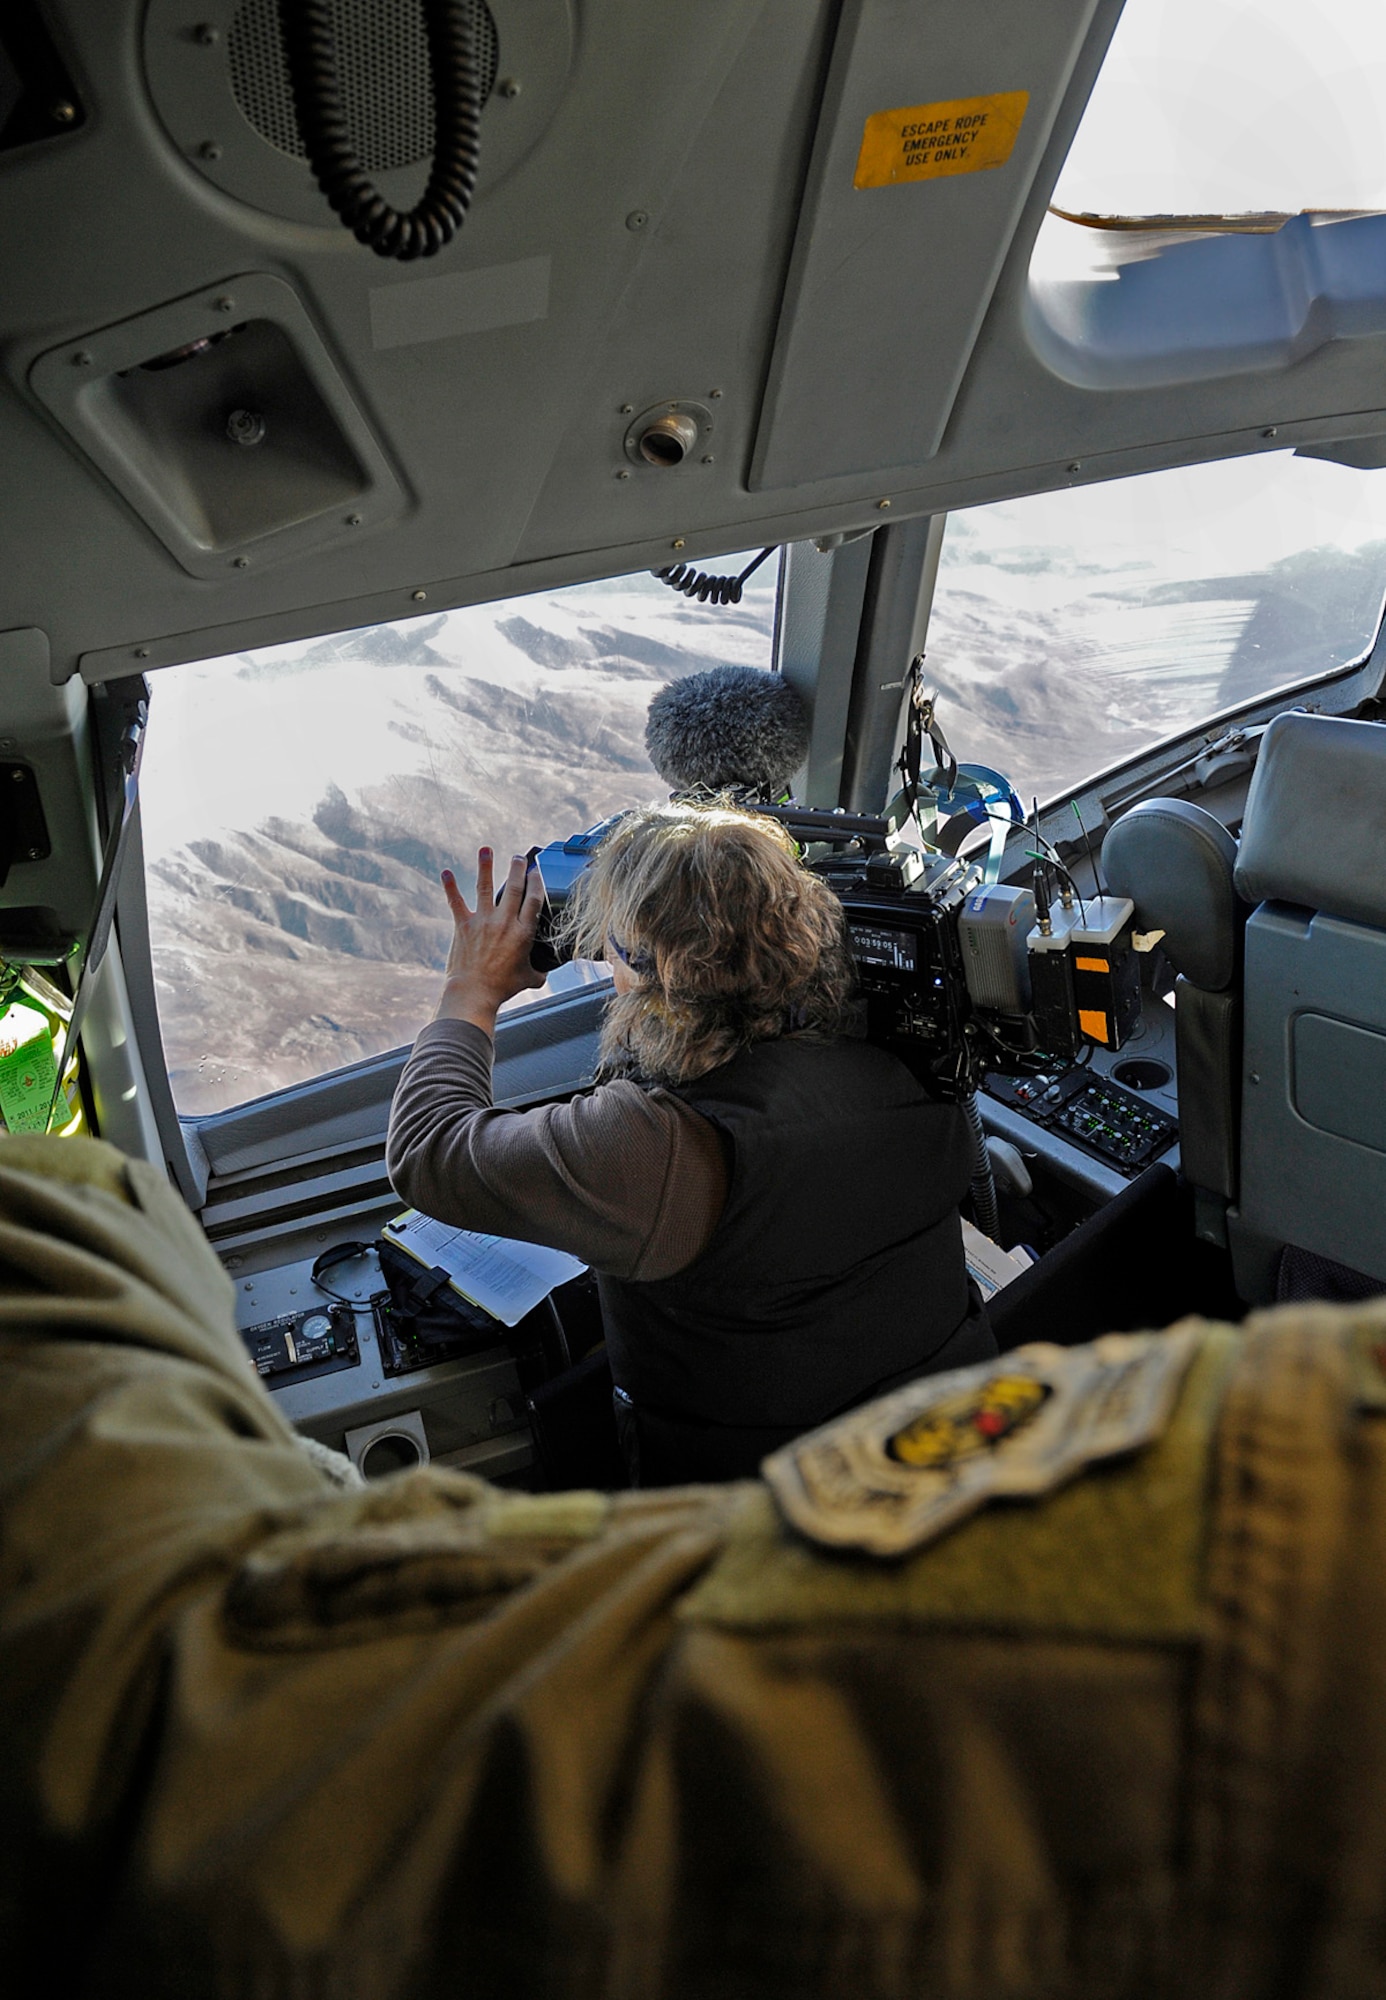 Chris Gargus, Discovery Channel freelance cameraman, films the Alaska landscape from the cockpit of a C-17 Globemaster III cargo plane, Sept. 21, 2012. The Discovery Channel is going to feature the C-17 on a future episode of "Mighty Planes." (U.S. Air Force photo/Staff Sgt. Zachary Wolf)